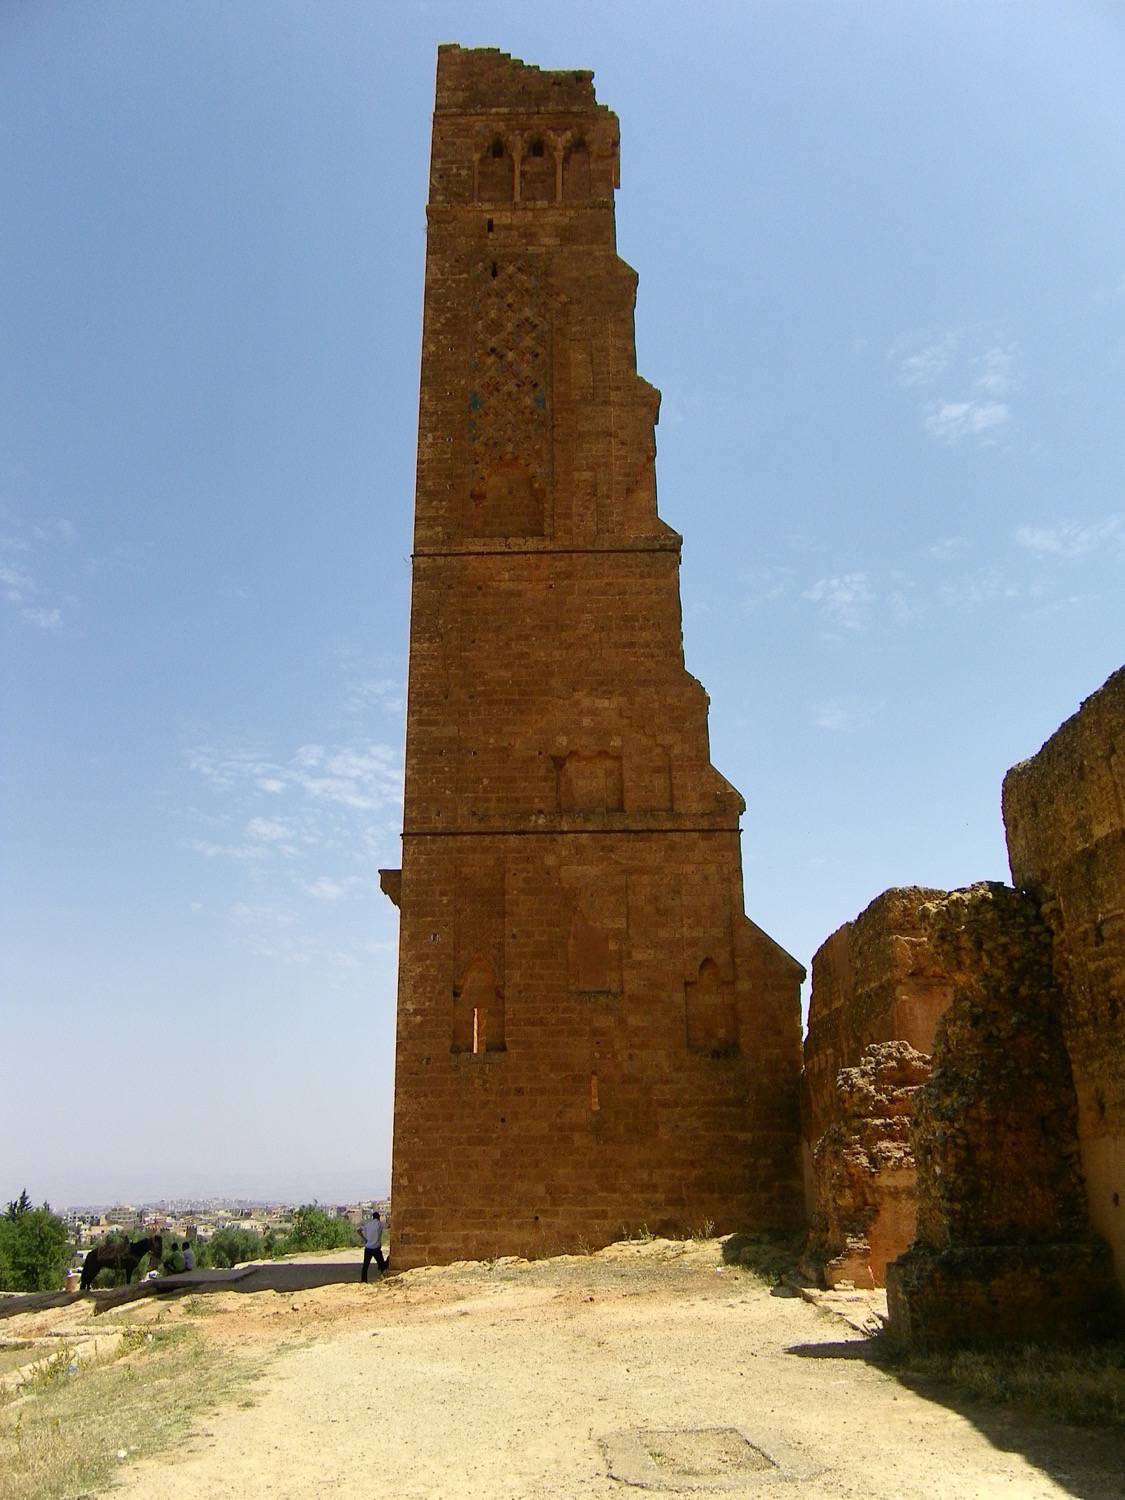 Remains of the minaret